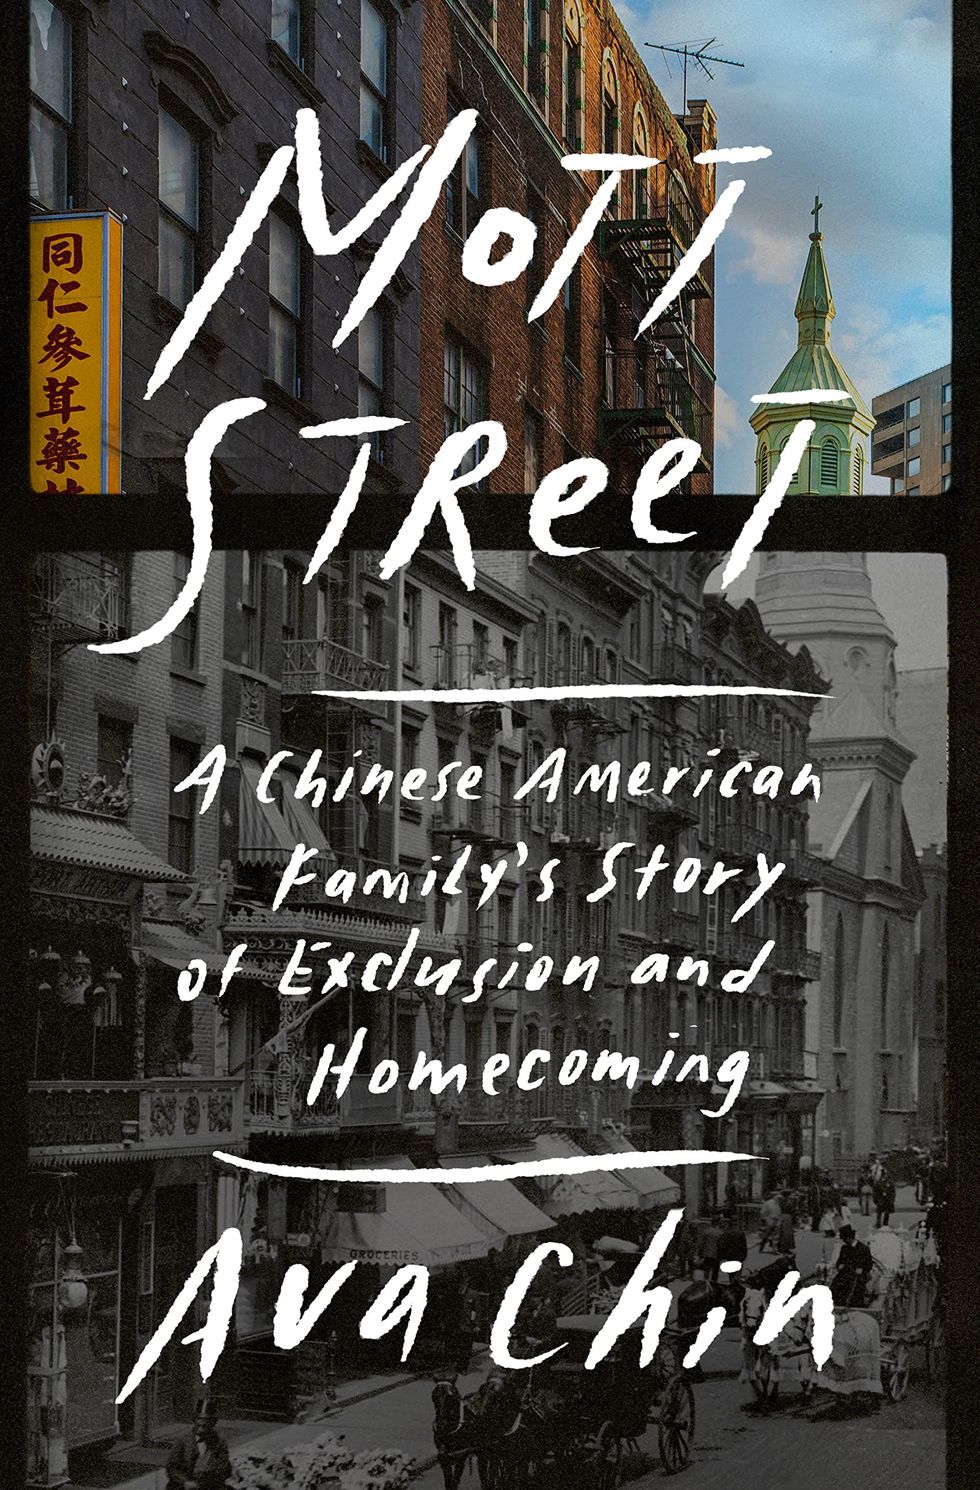 <i>Mott Street: A Chinese American Family’s Story of Exclusion and Homecoming</i>